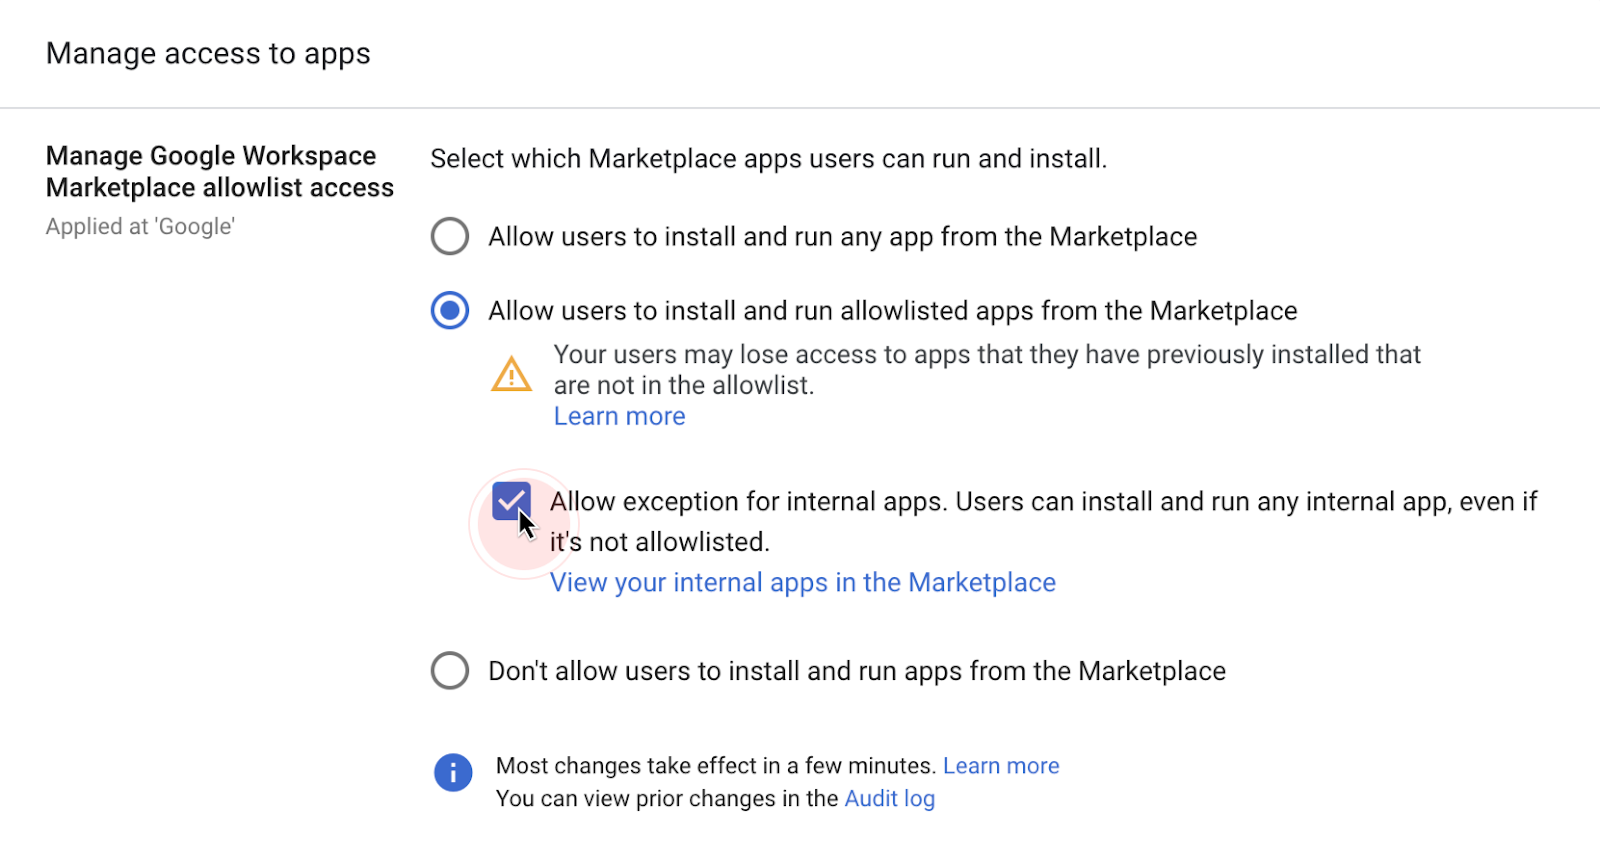 Allow users to install and run any internal app from Marketplace